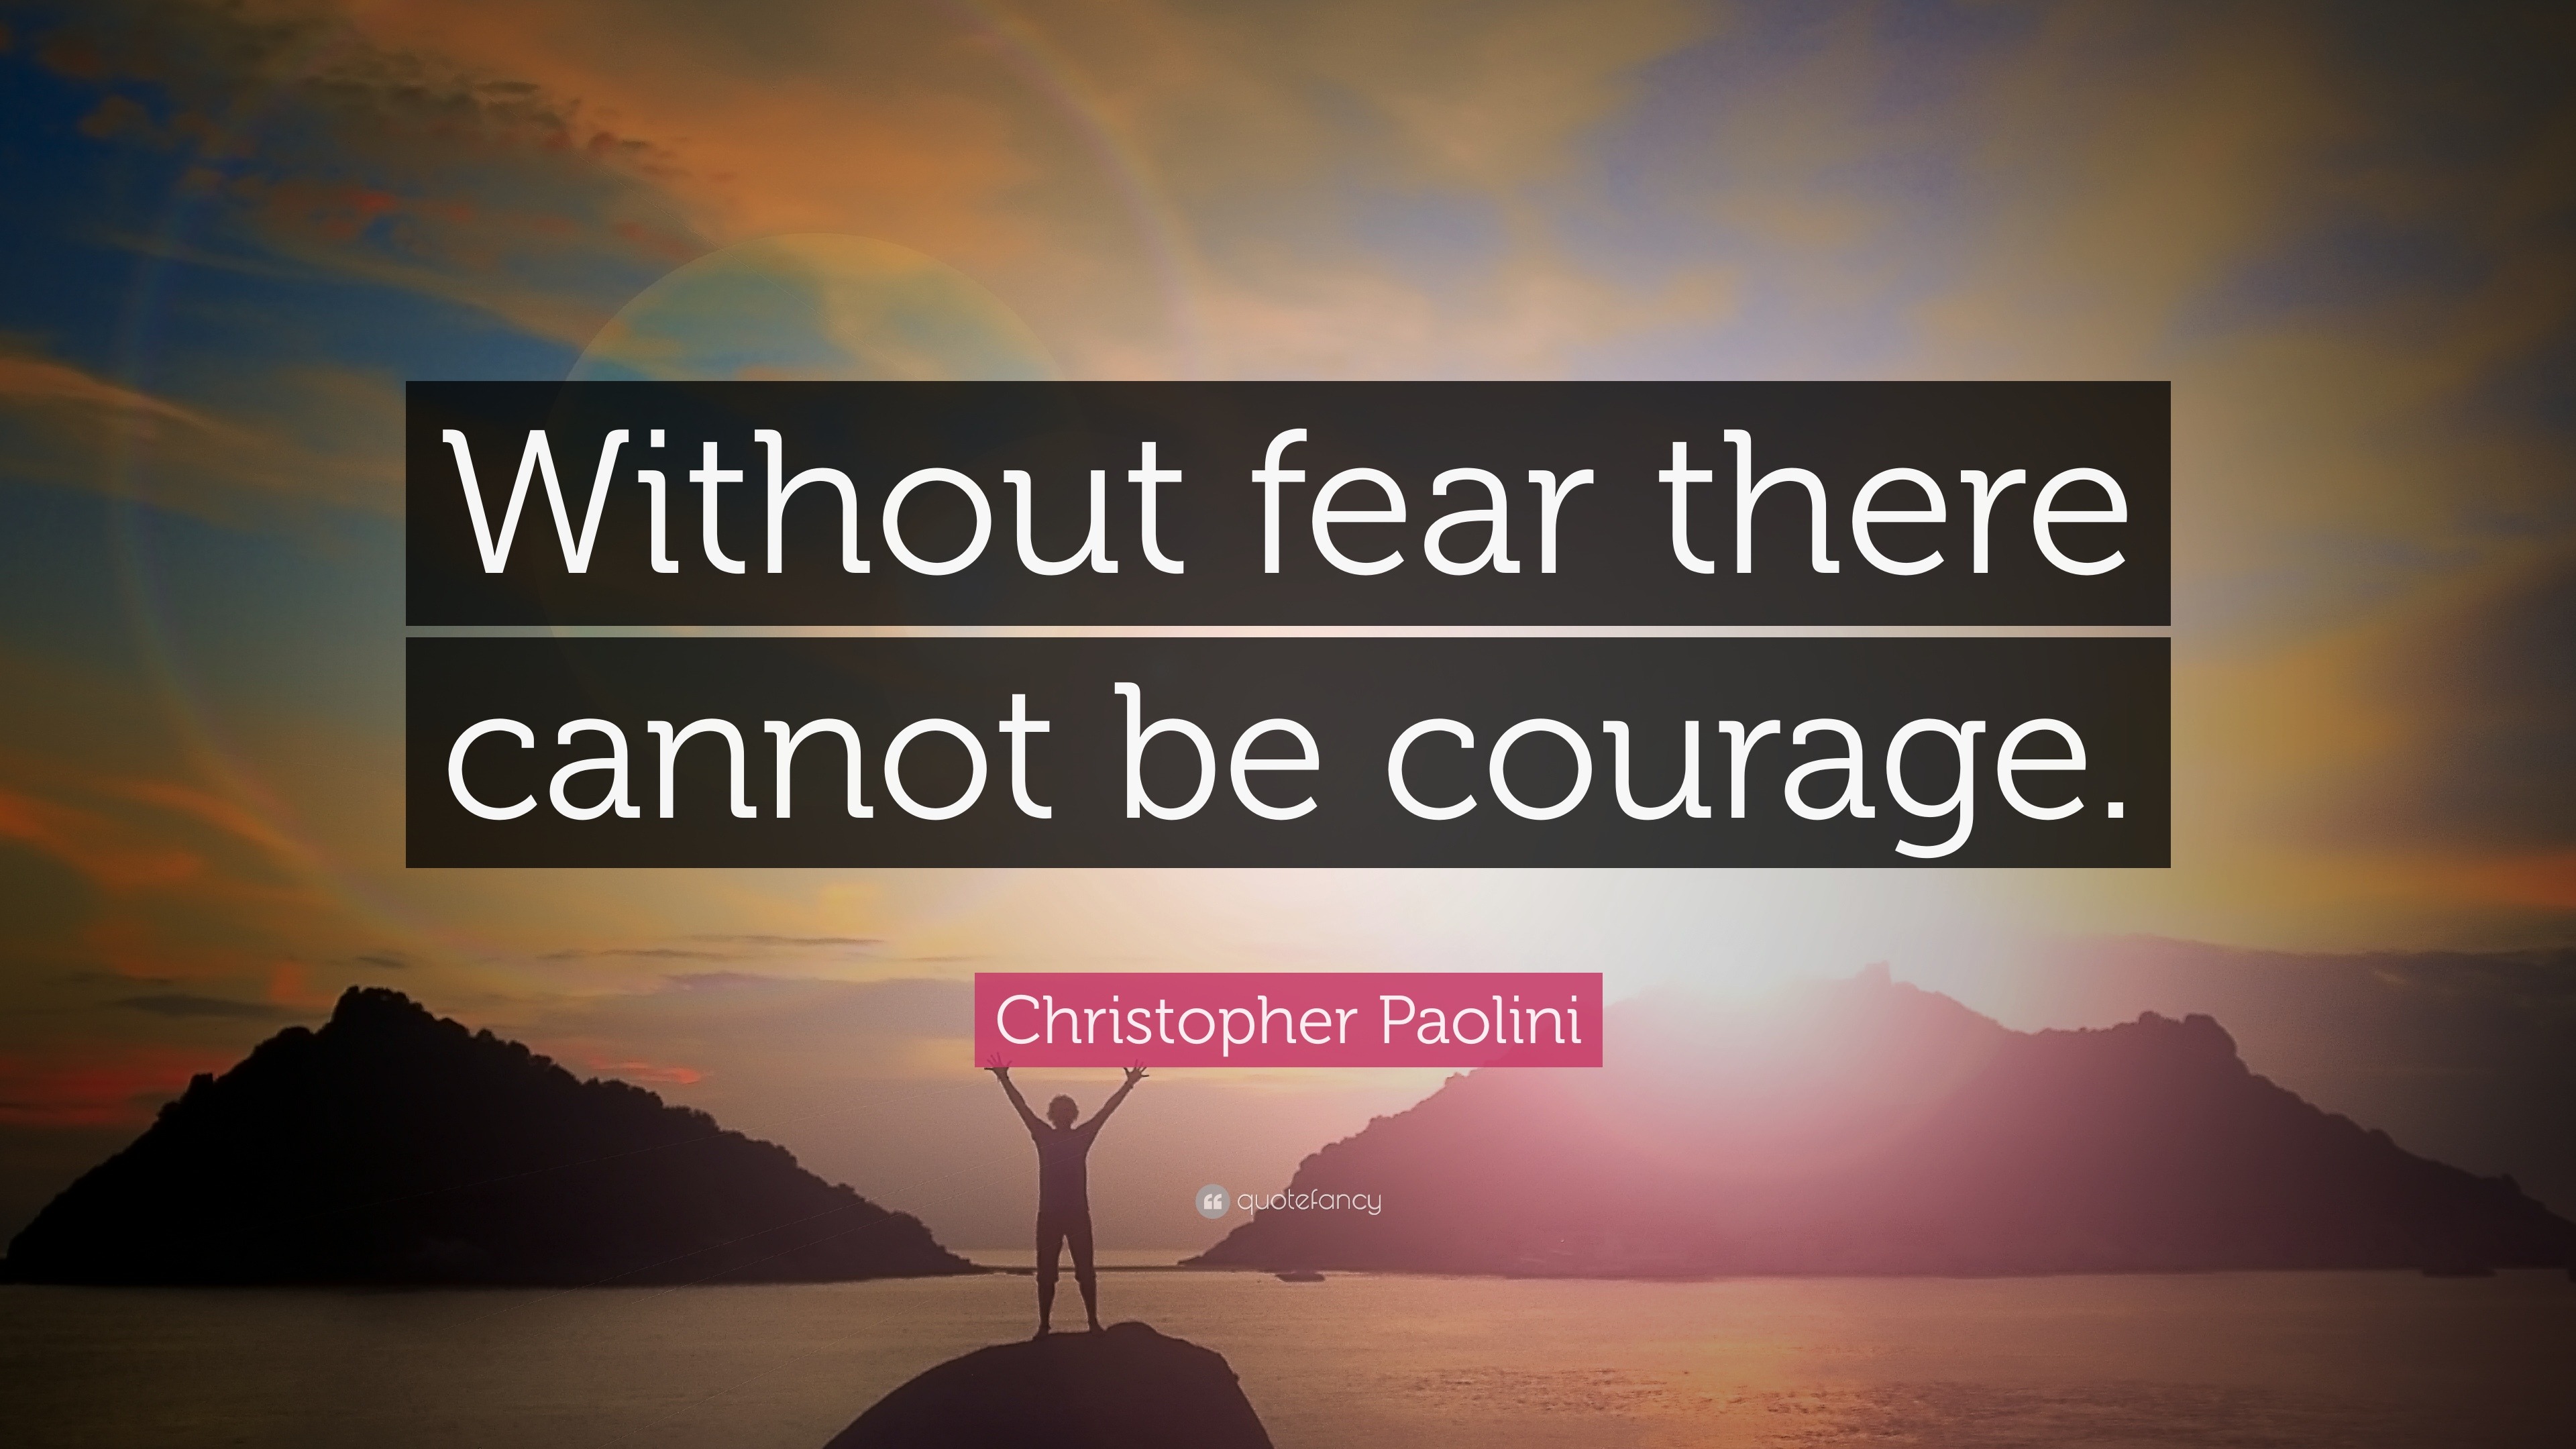 Christopher Paolini Quote: “Without fear there cannot be courage.”